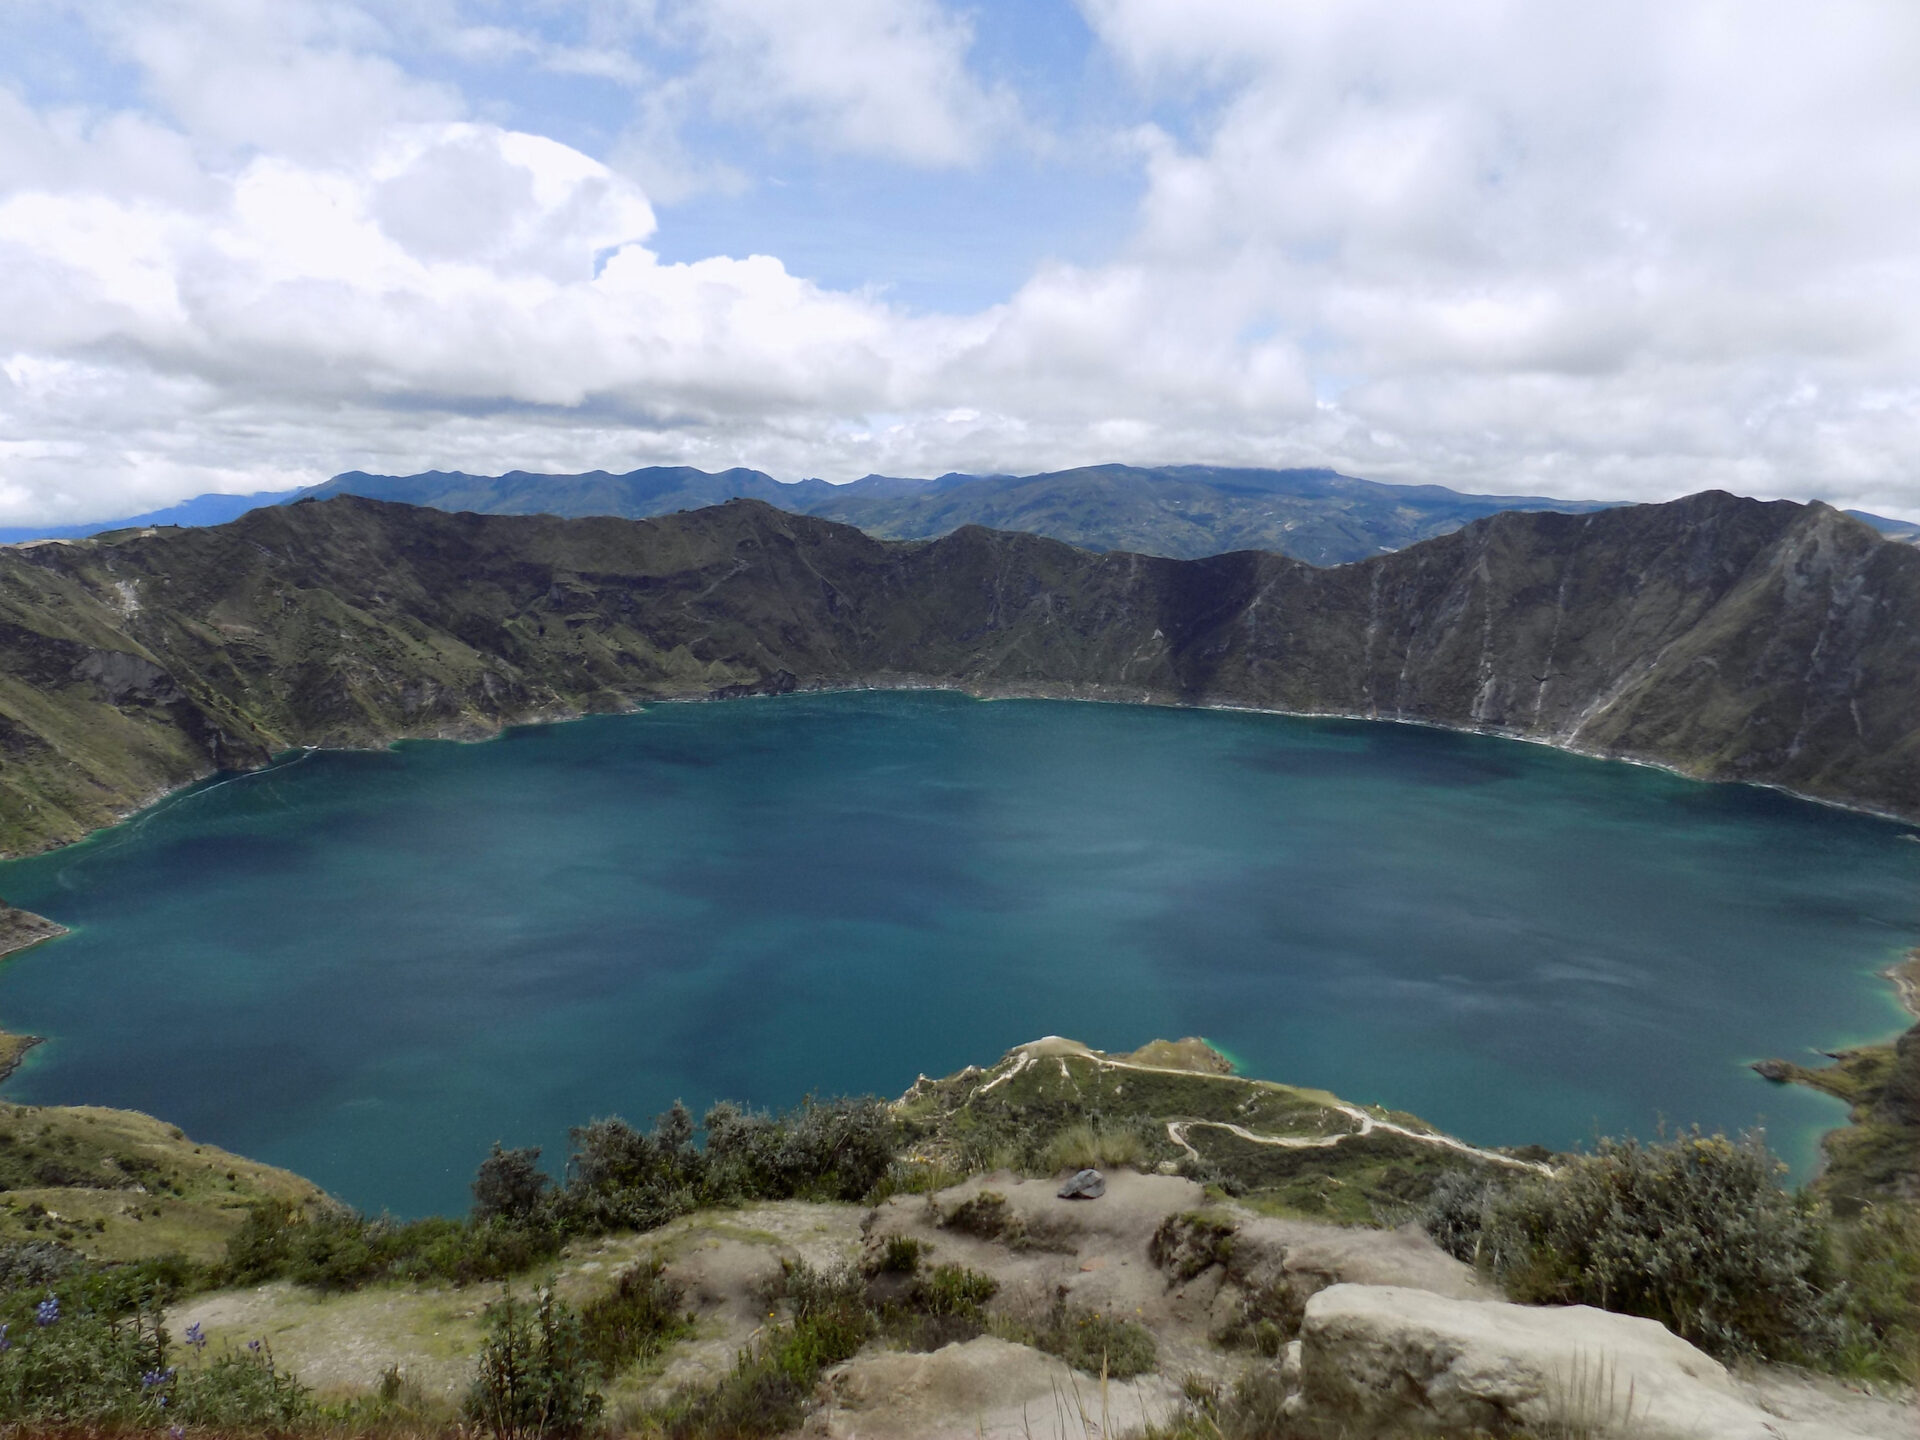 Laguna Quilotoa is well worth a visit